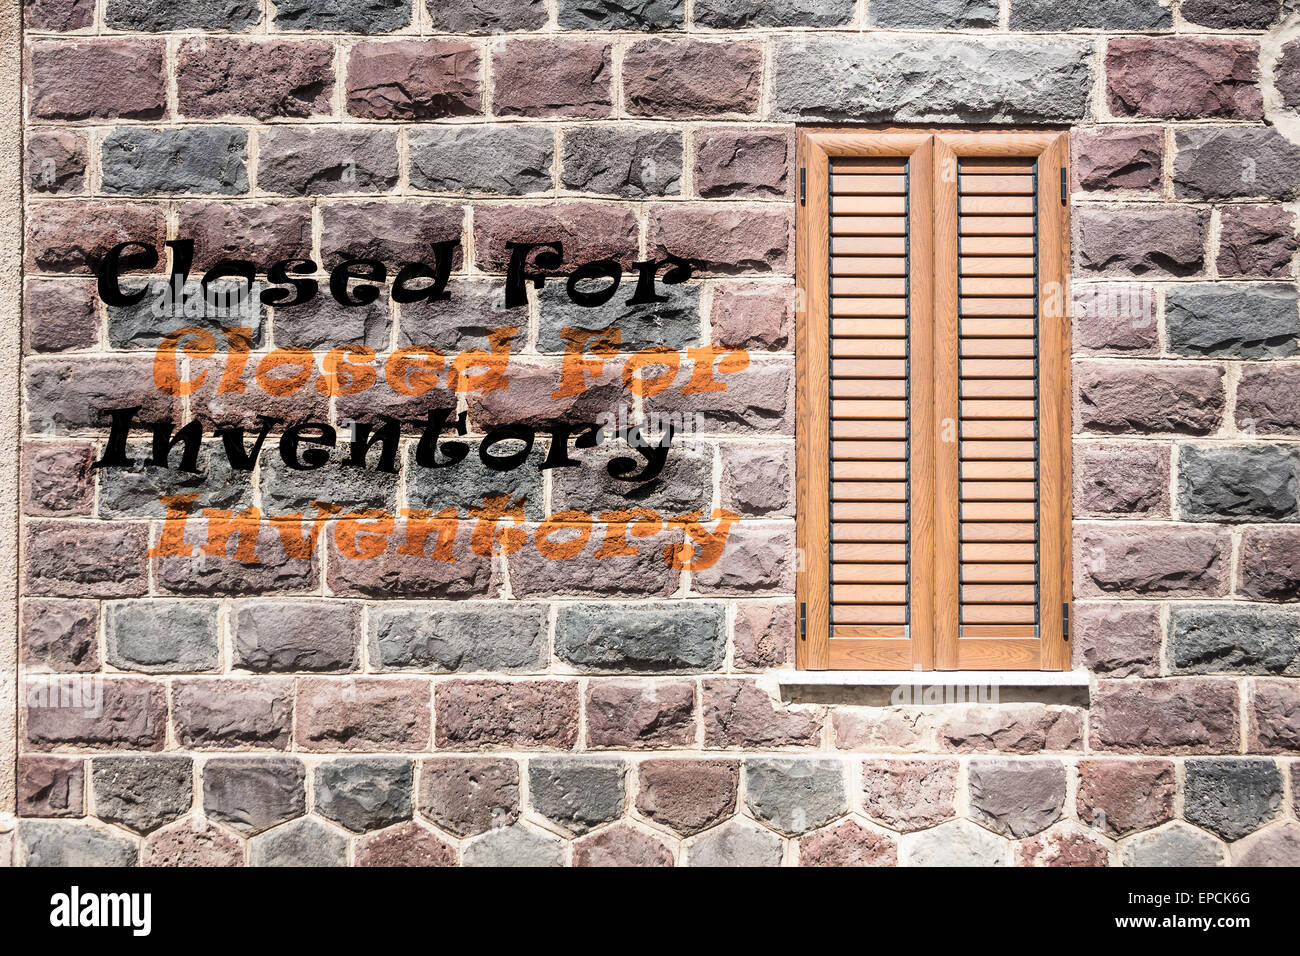 Window on the wall of basalt with written 'Closed For Inventory' Stock Photo